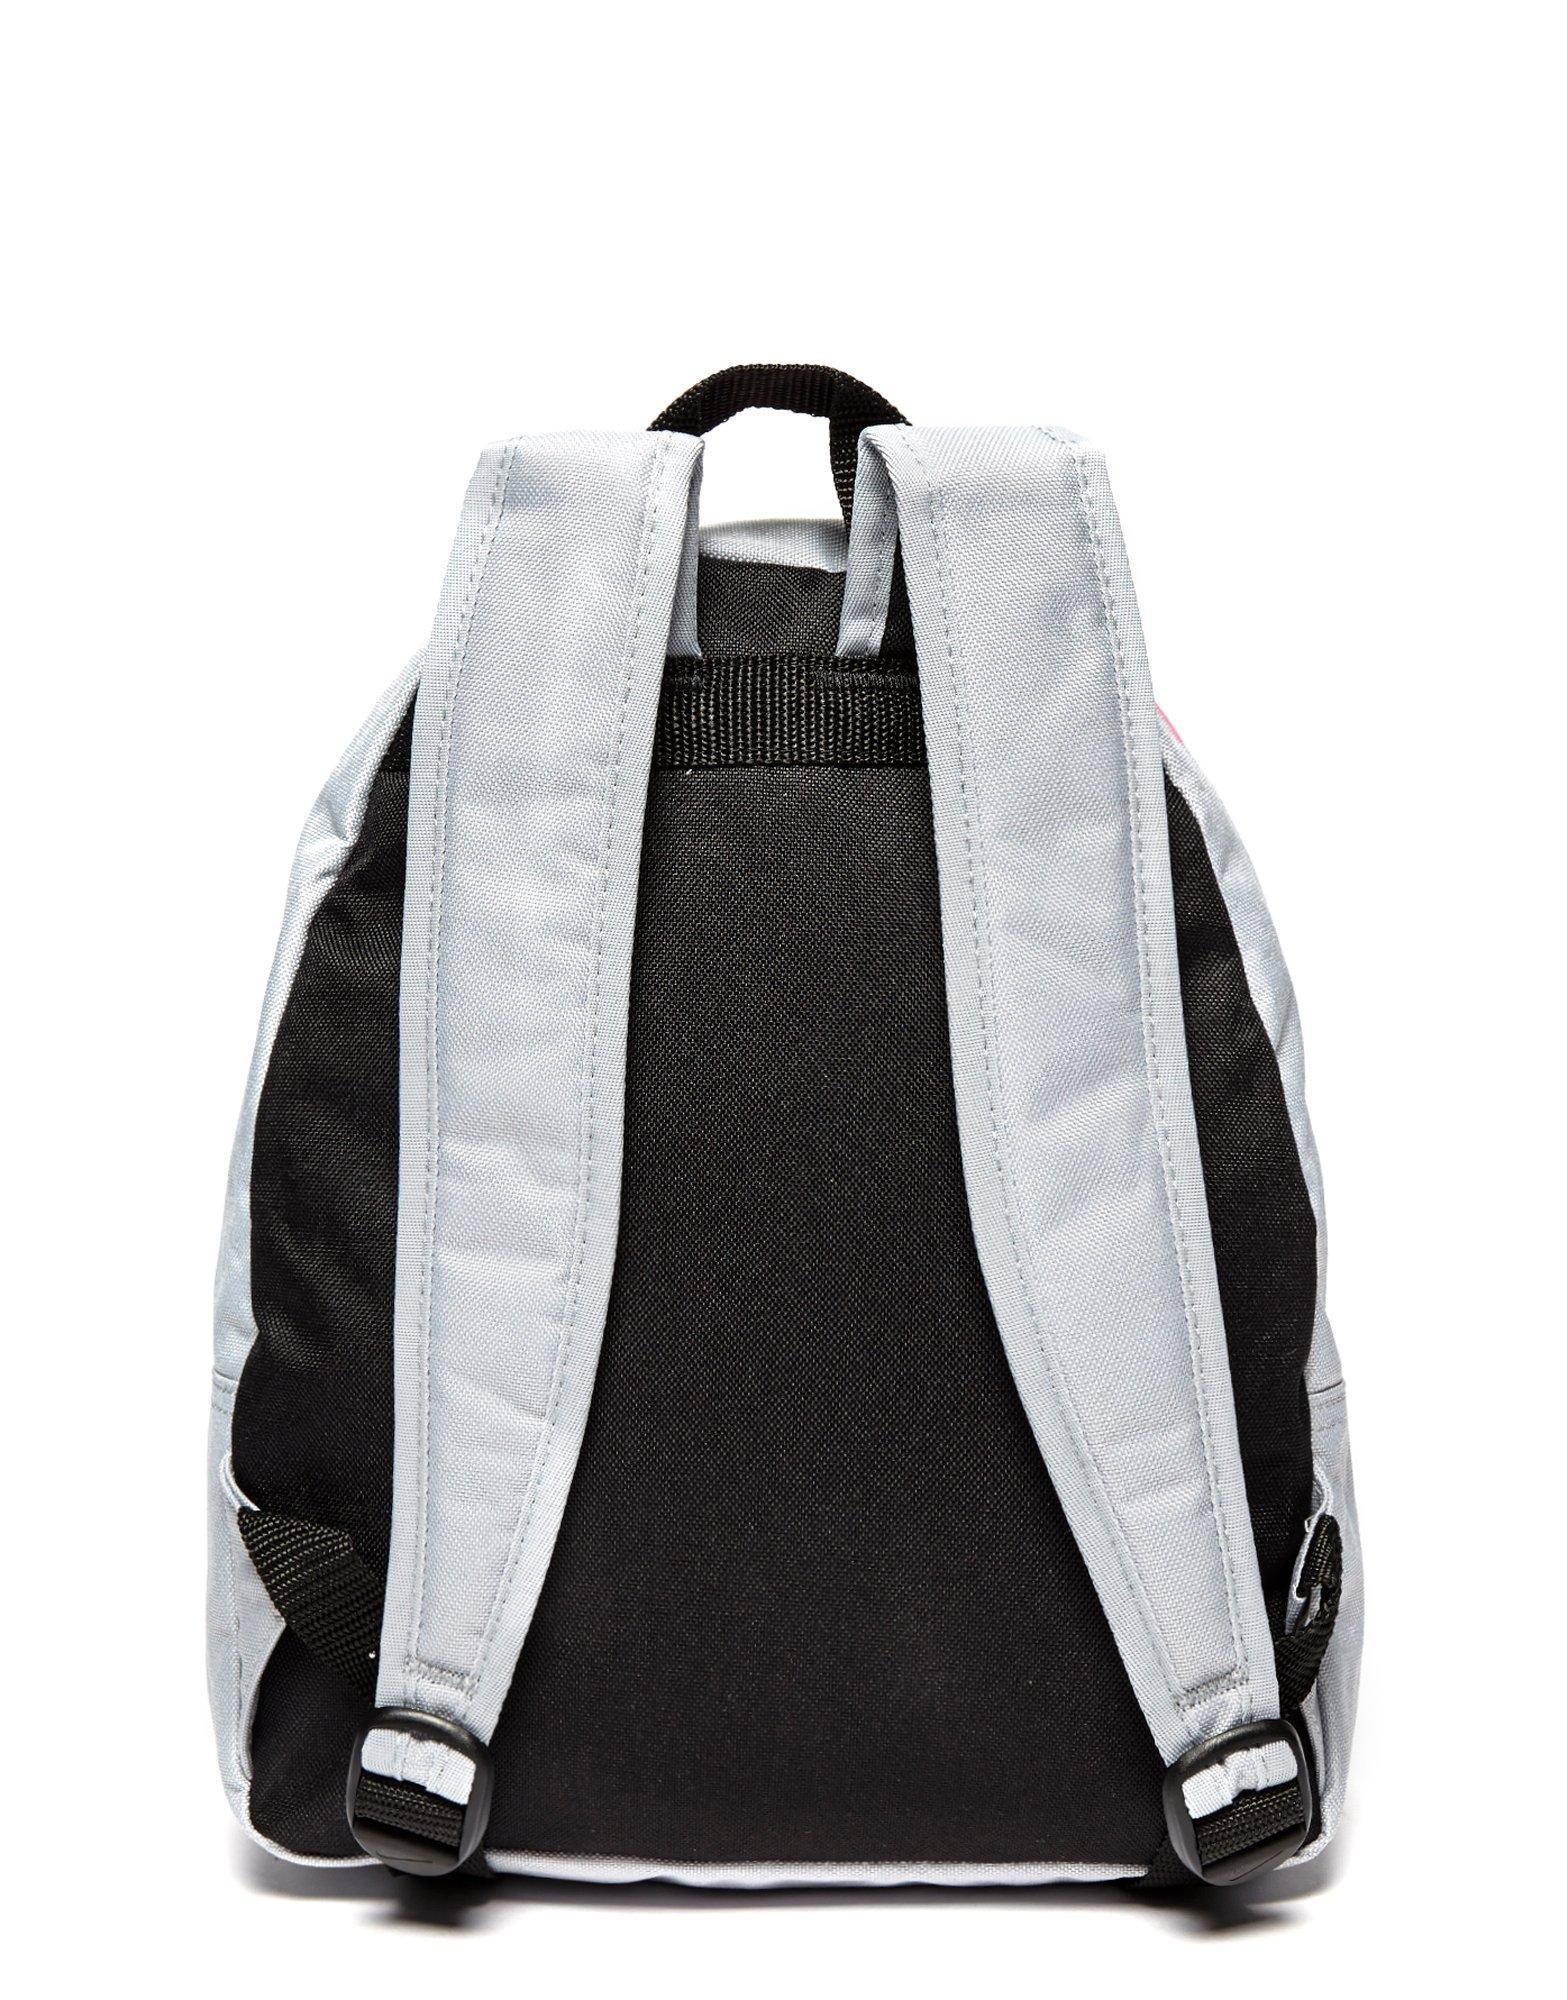 Nike Synthetic Ya Just Do It Mini Backpack in Gray - Lyst